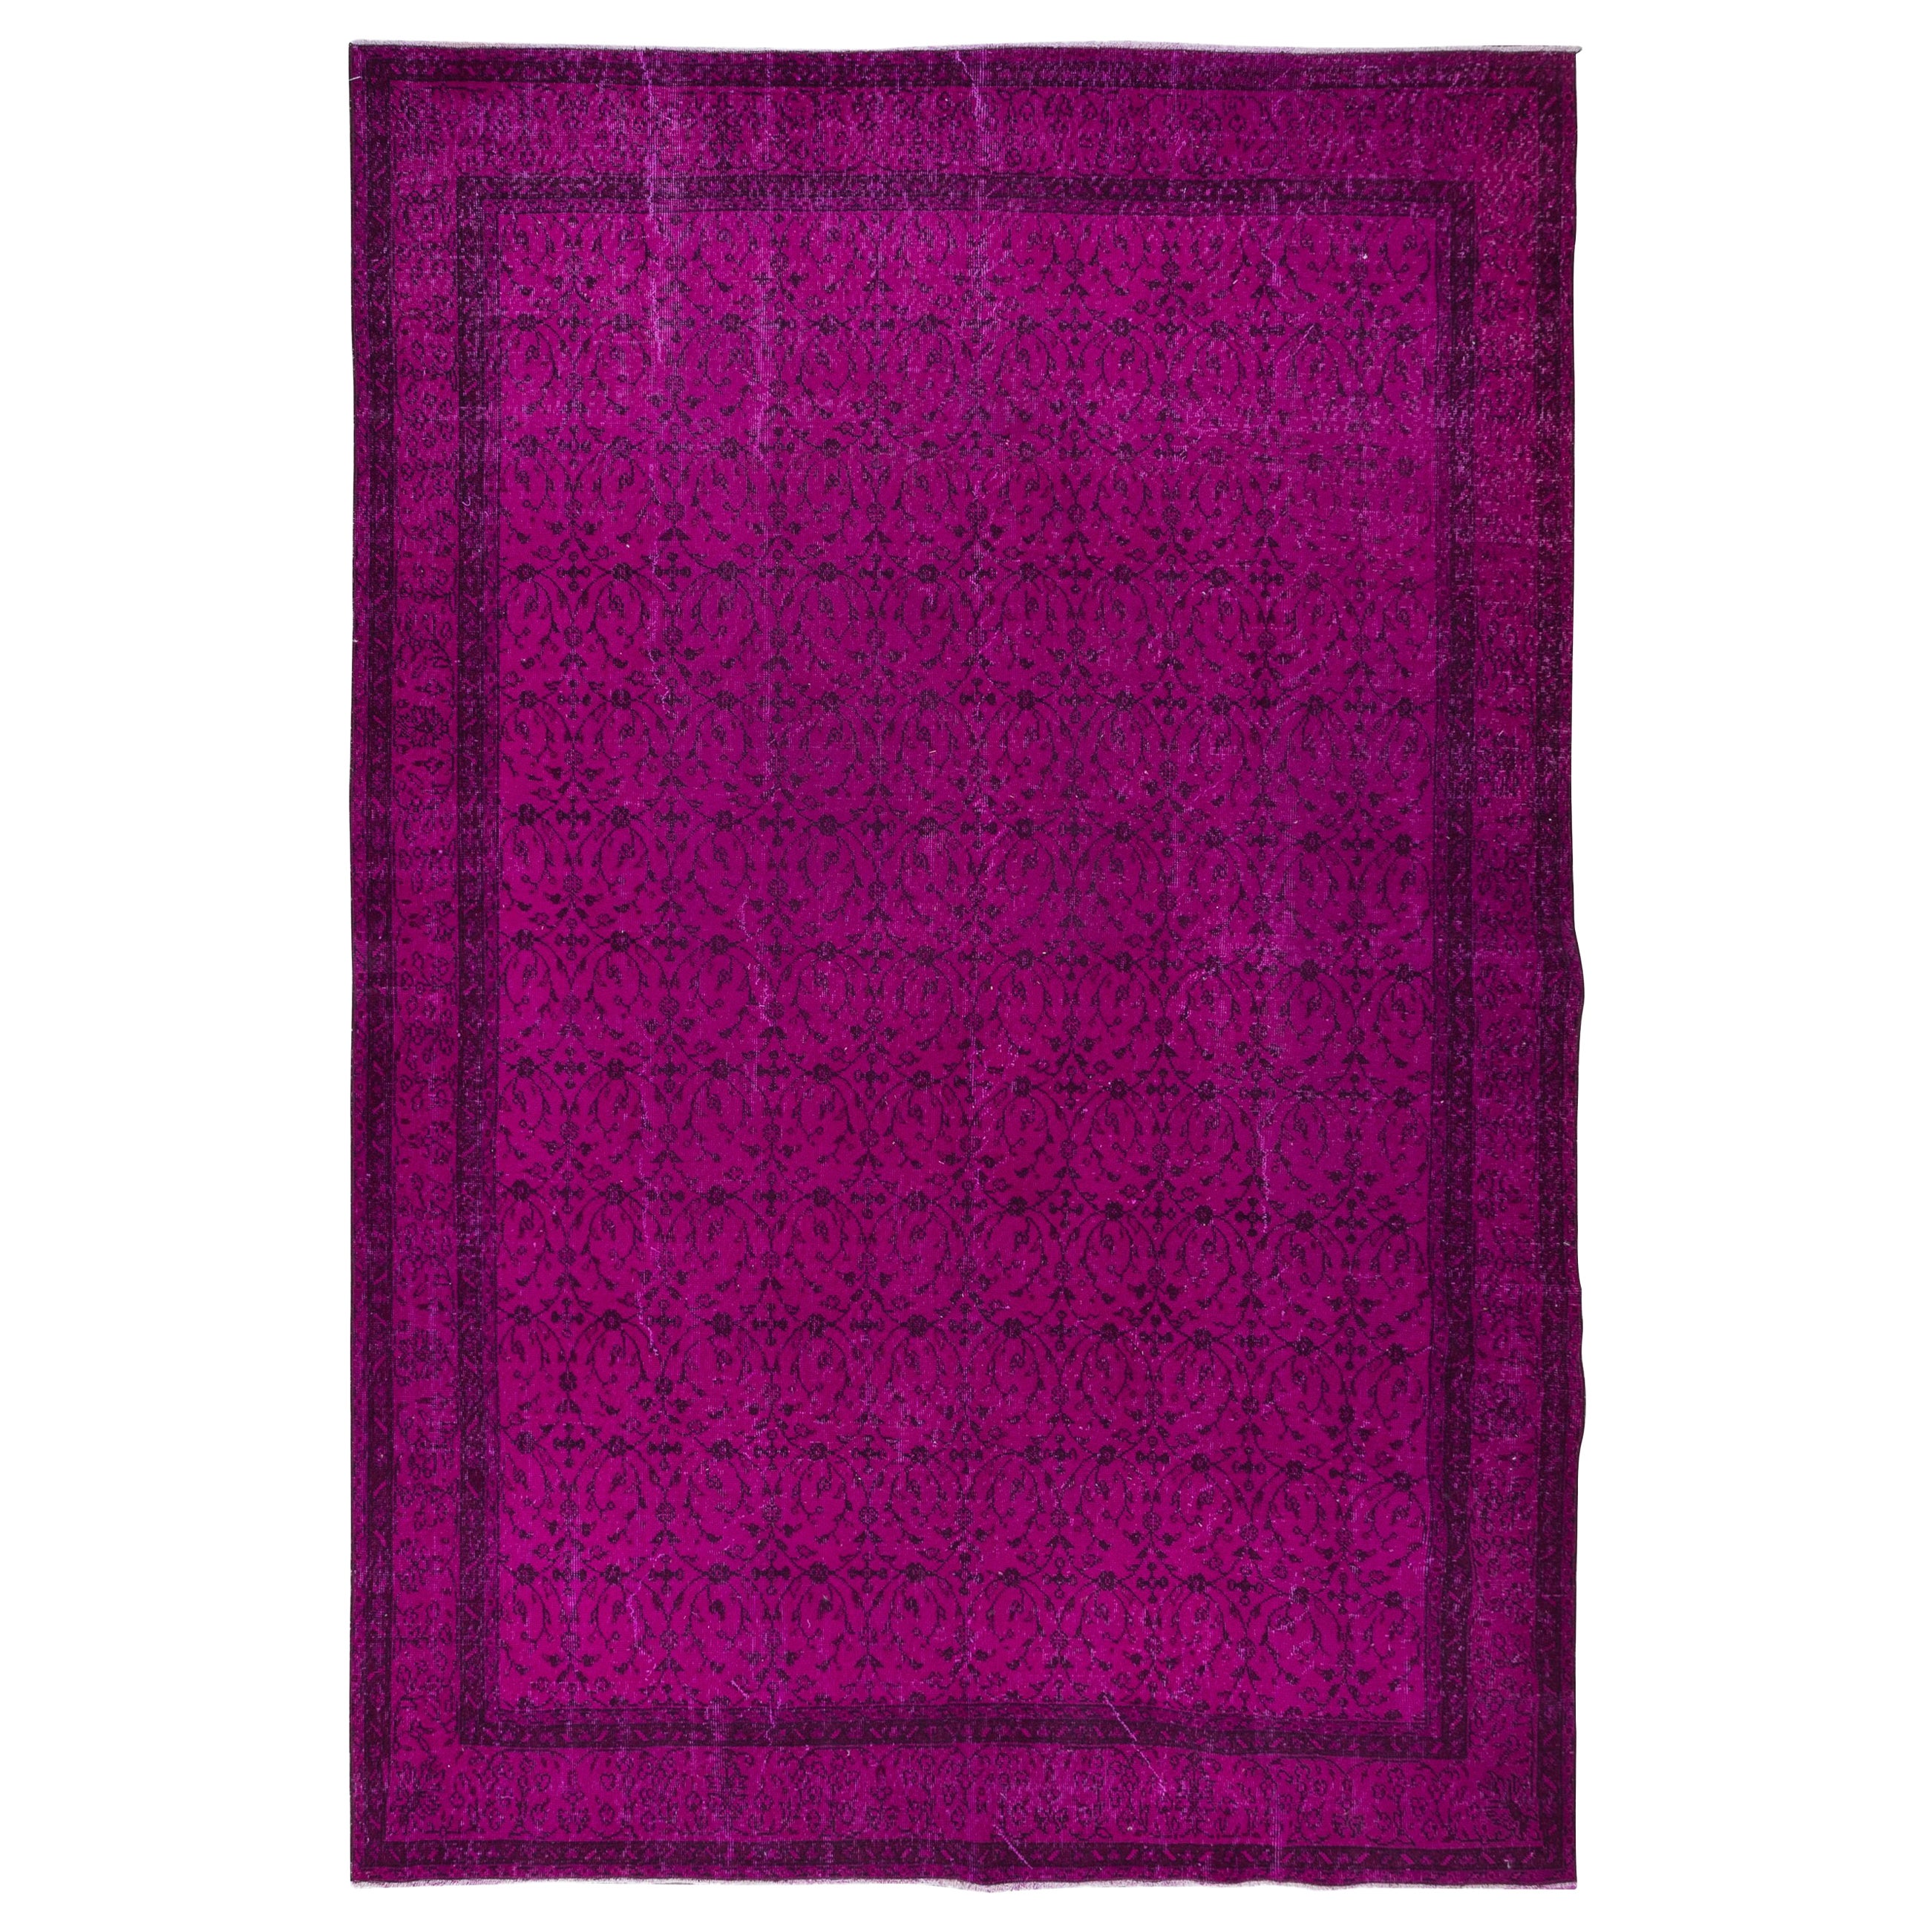 8x12 Ft Decorative Pink Large Rug for Modern Interiors, Handmade in Turkey